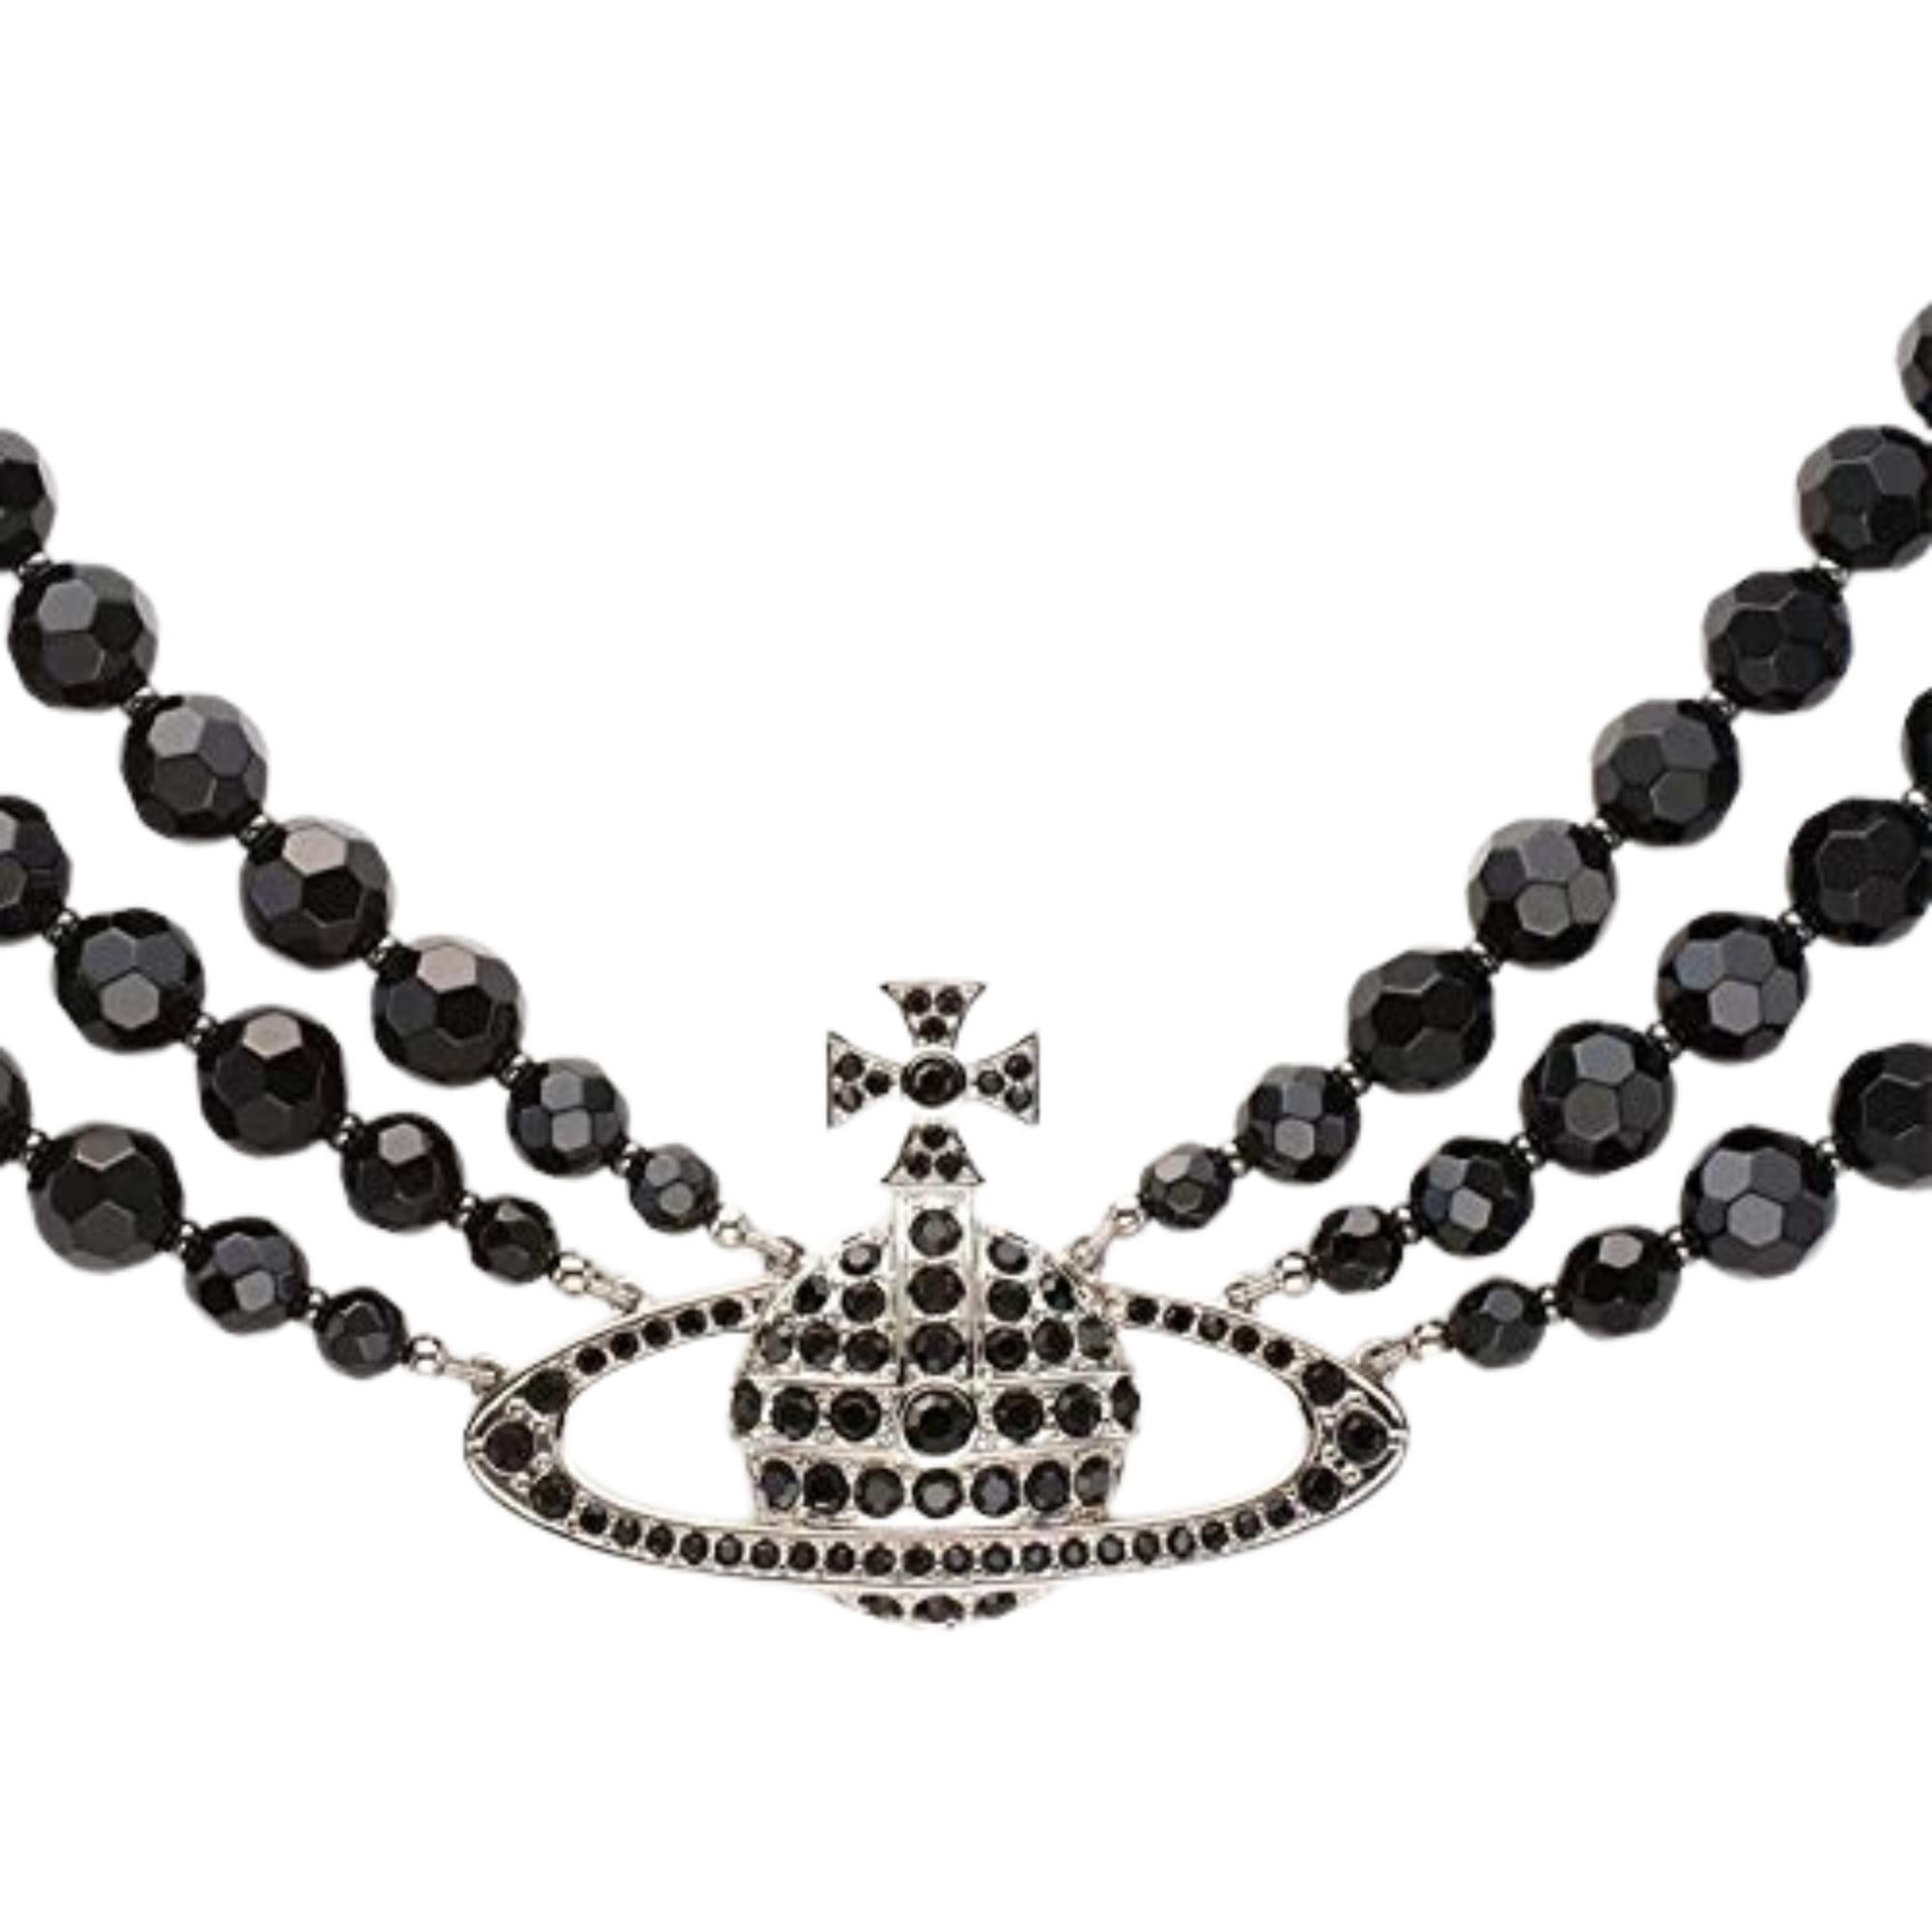 Featuring three hand-knotted rows of Swarovski pearls meeting together at a branded closure at the back, the necklace is complimented with the signature silver Orb elegantly placed in the centre.


Color: Silver metal & black faux pearl
Material: